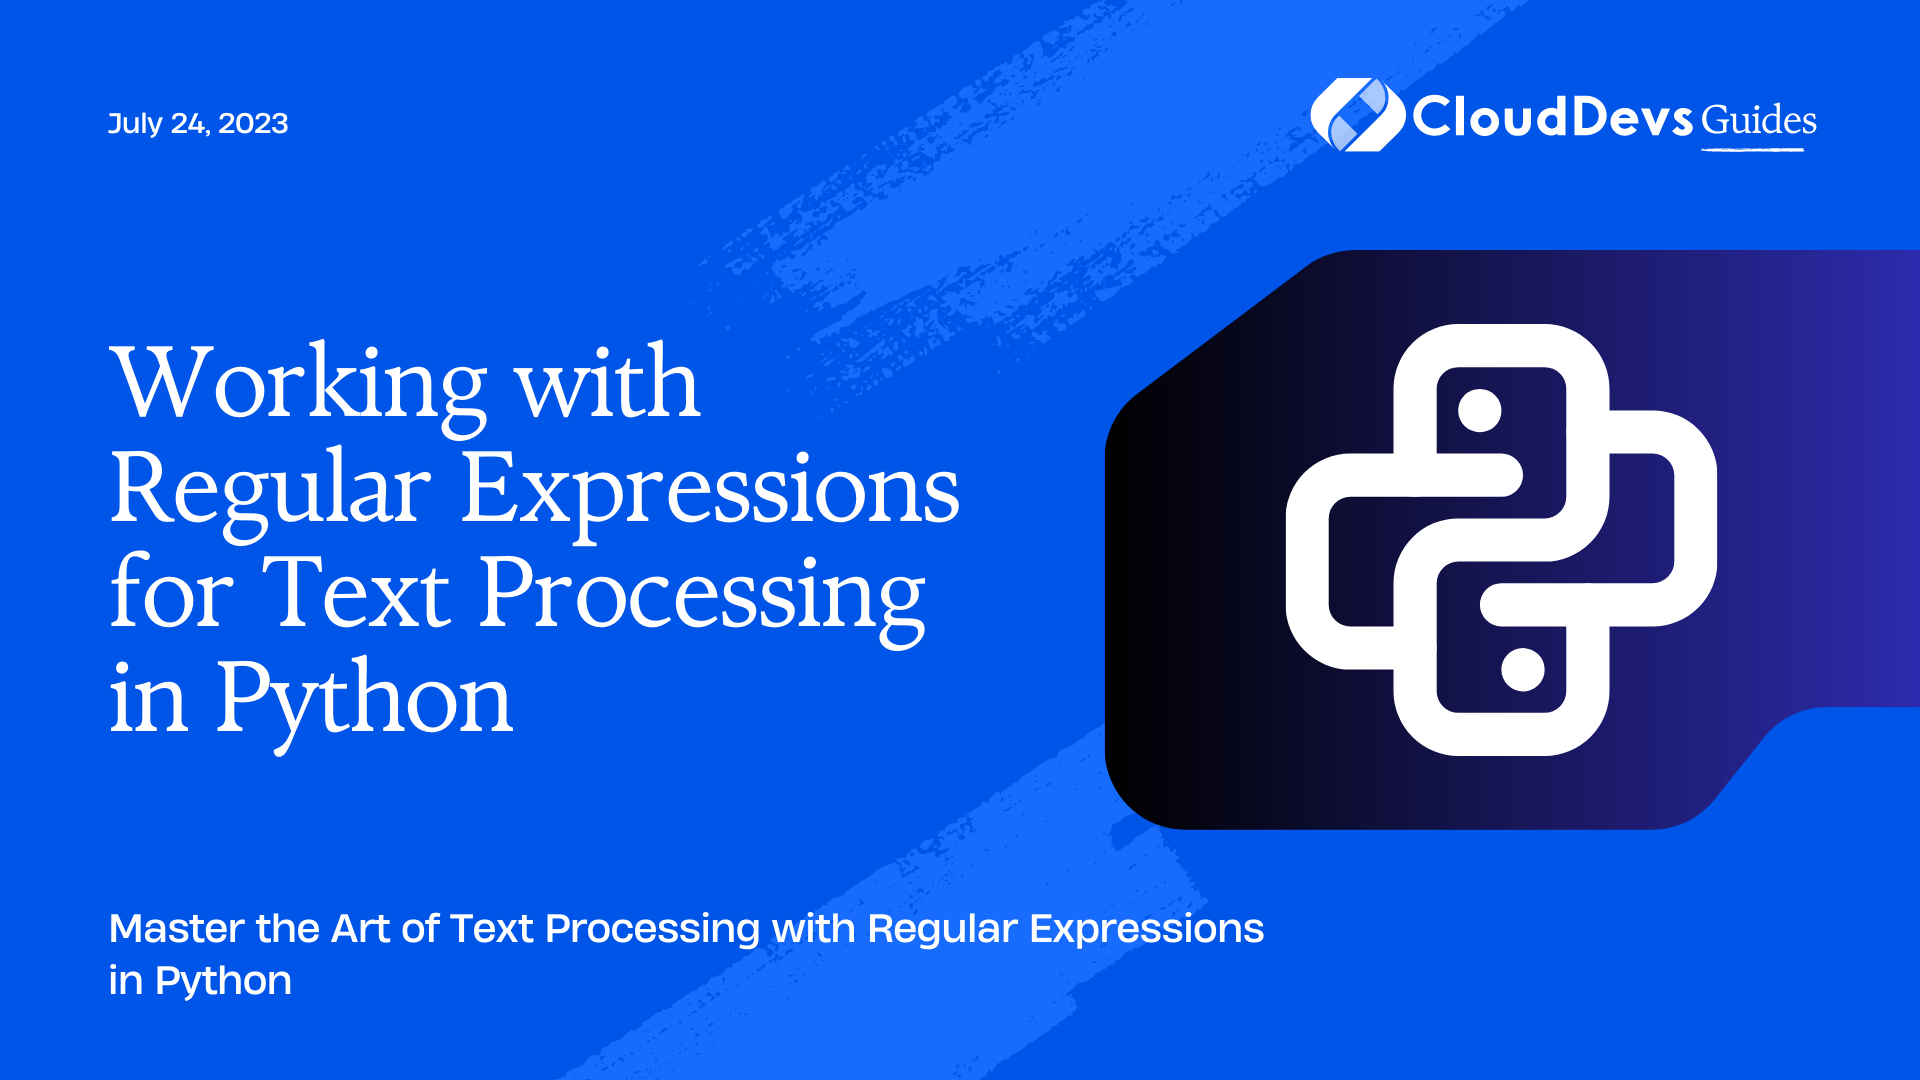 Working with Regular Expressions for Text Processing in Python